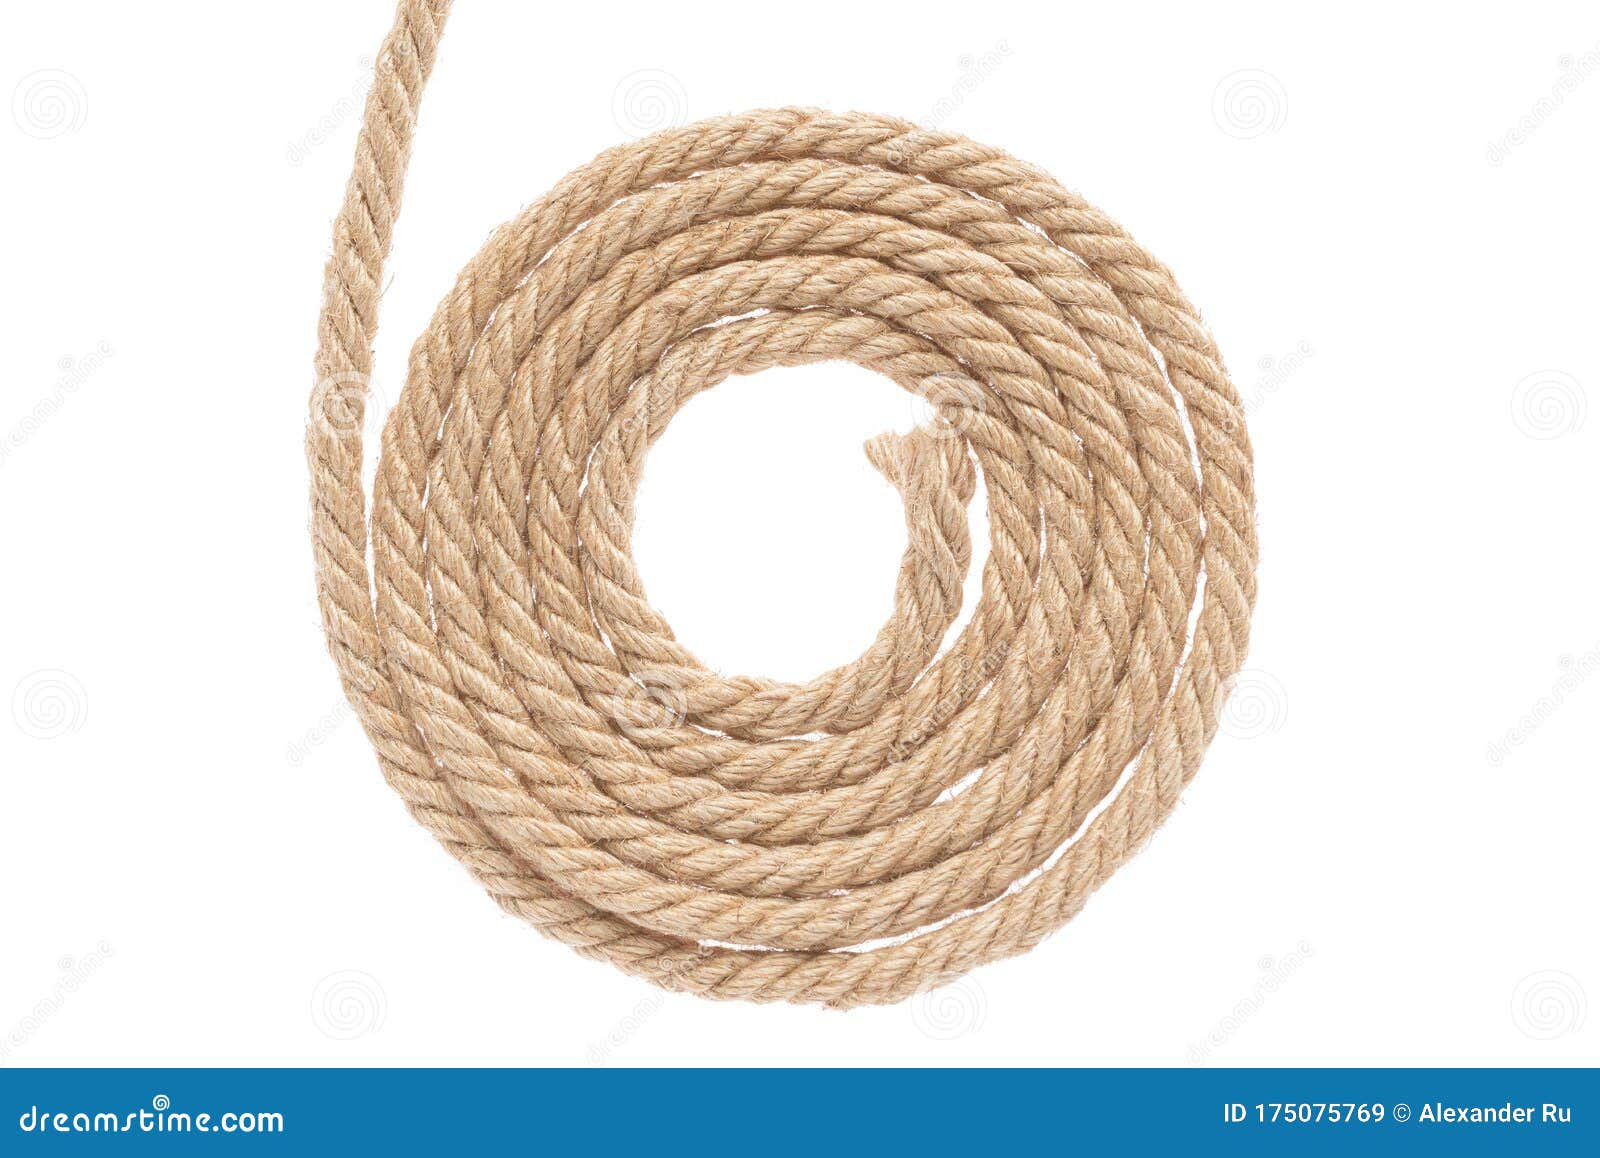 Twisted Jute Rope. Isolated on a White Background Stock Image